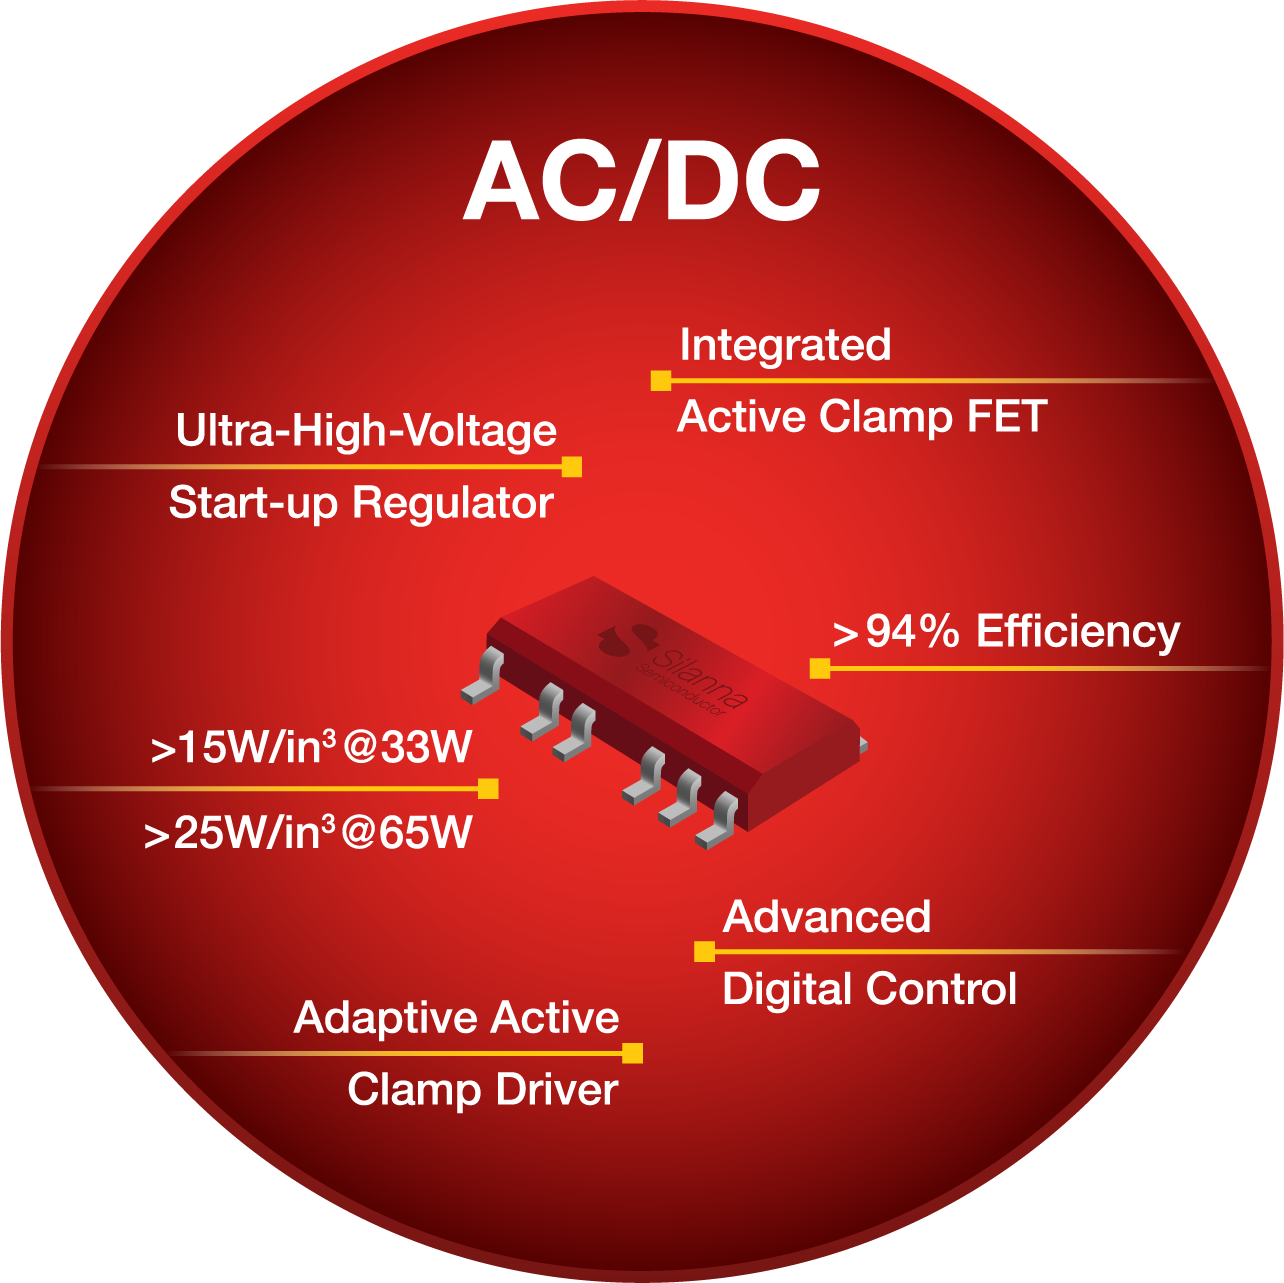 Flyback PWM Controllers with integrated active clamp circuit combine design simplicity of flyback controllers with high efficiency and power density enabled by ACF controllers.